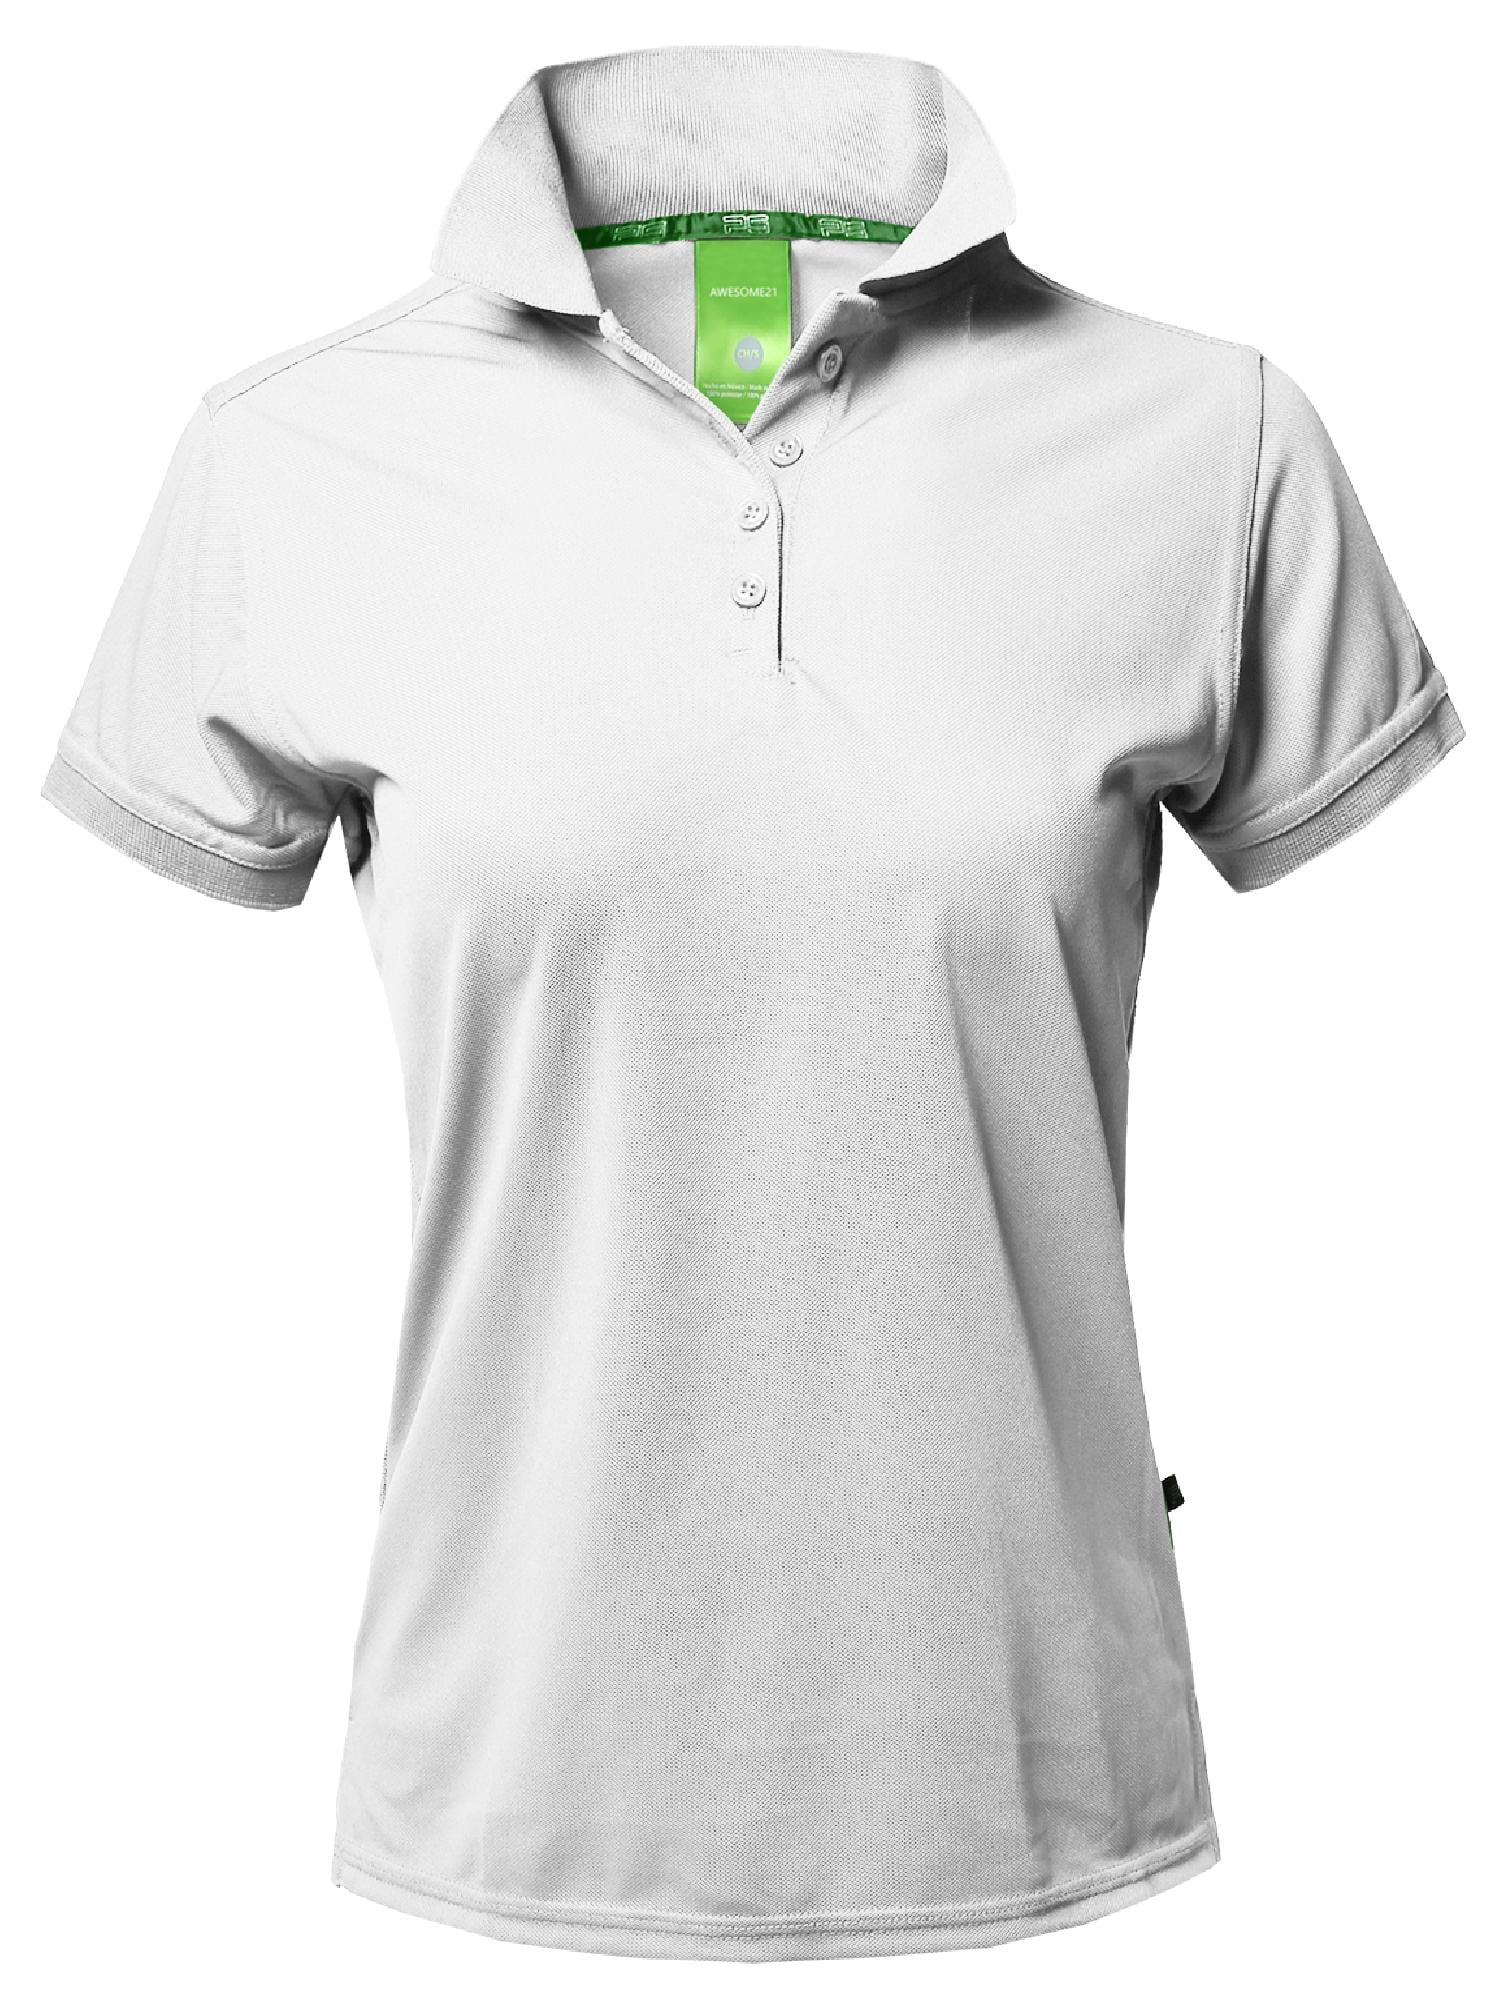 Awesome21 Womens Junior Size Breathable Button Placket Short Sleeves Polo Shirt